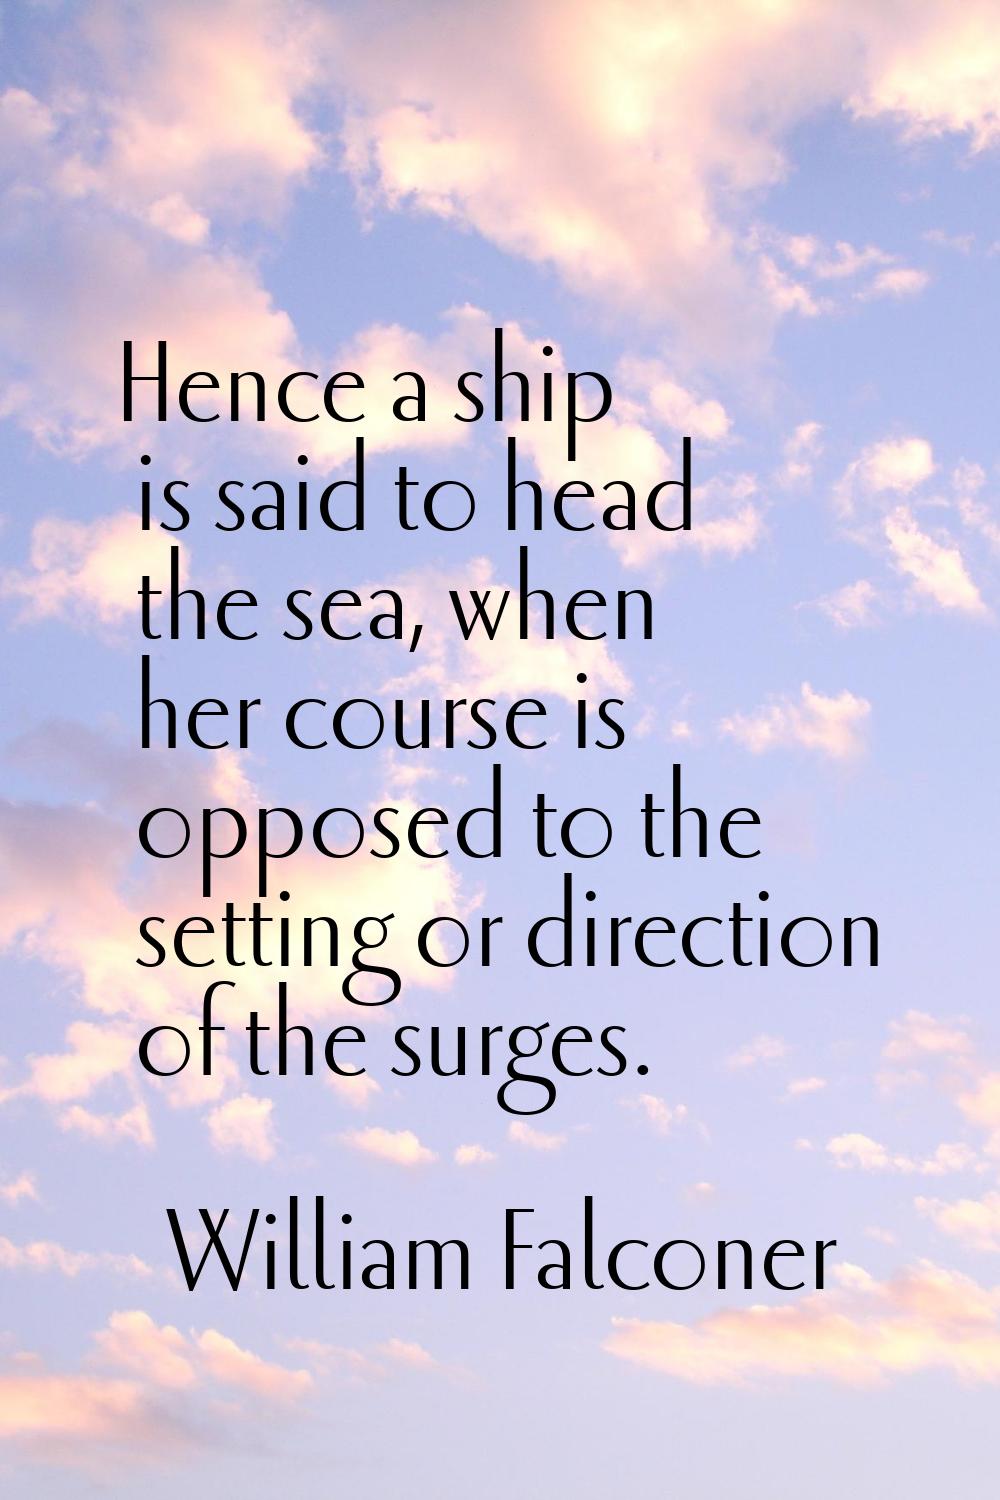 Hence a ship is said to head the sea, when her course is opposed to the setting or direction of the